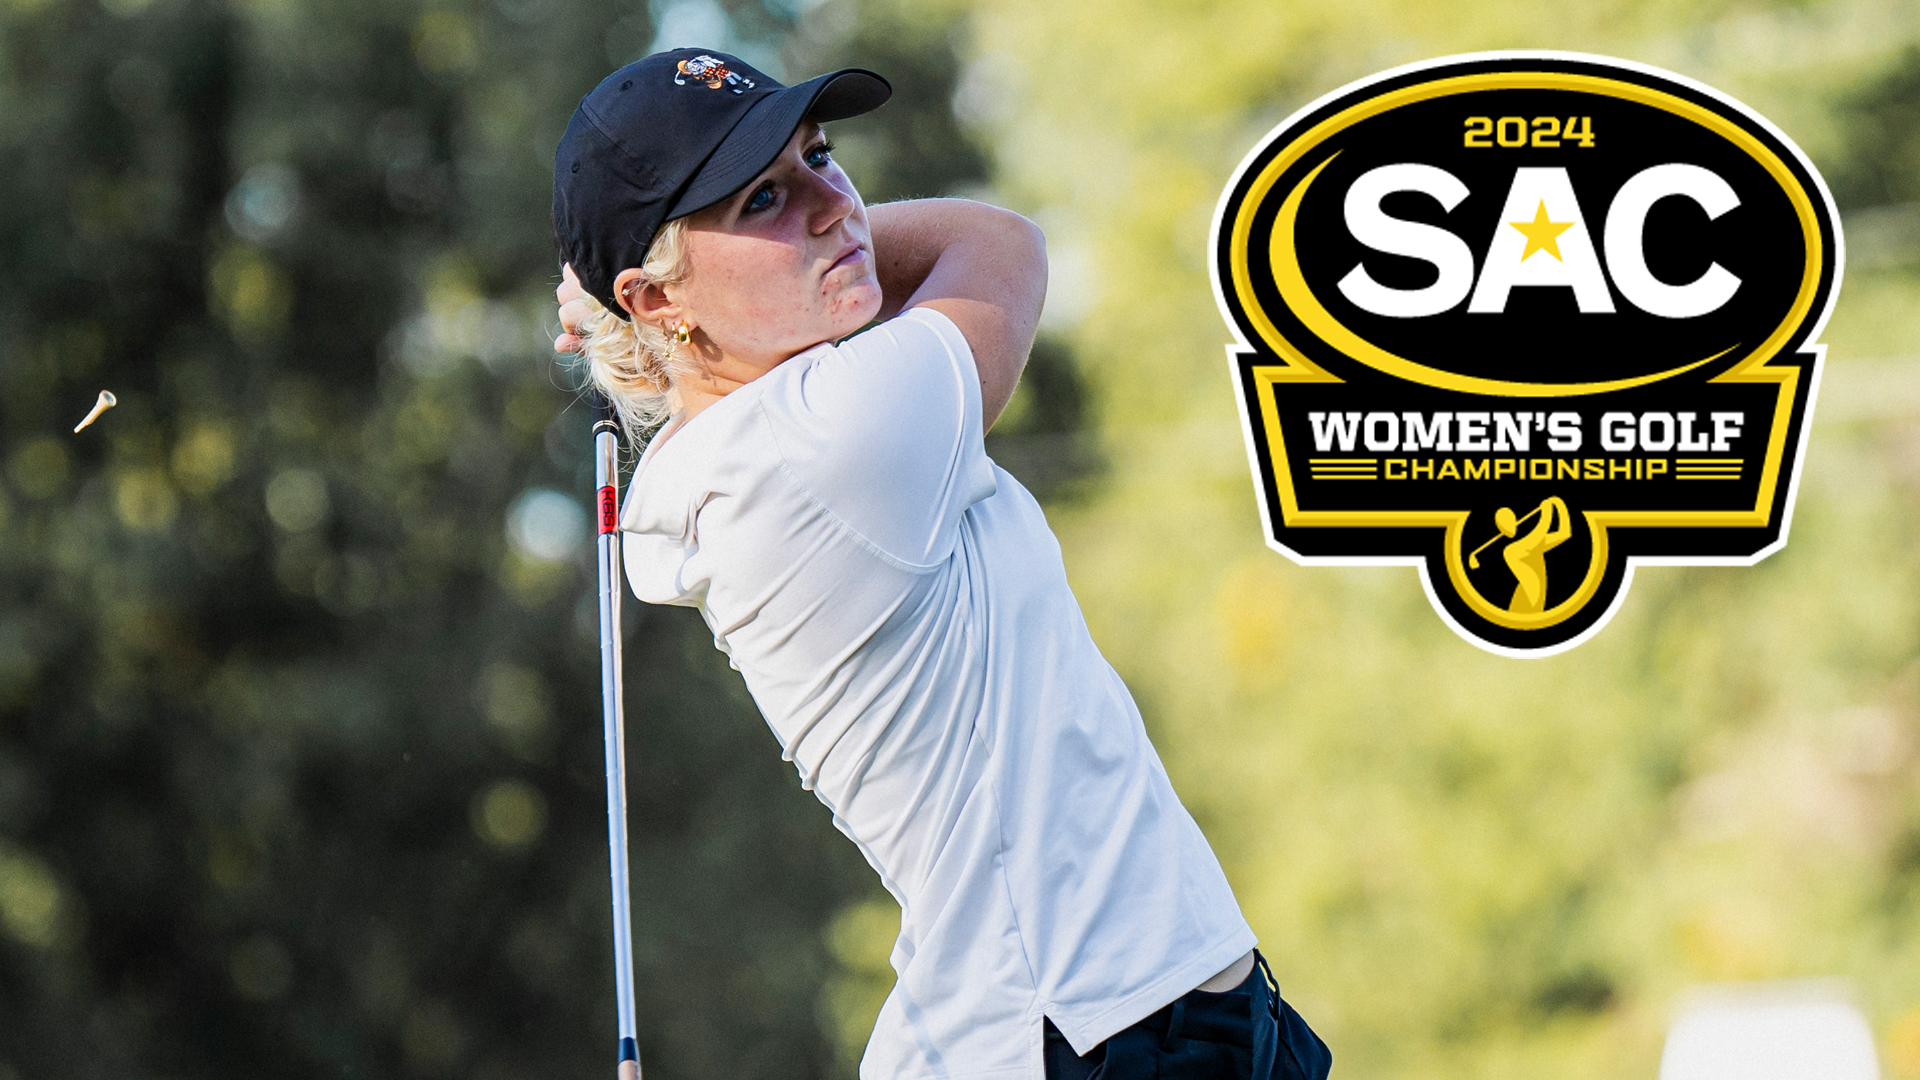 Pioneers to compete at SAC Women's Golf Championship